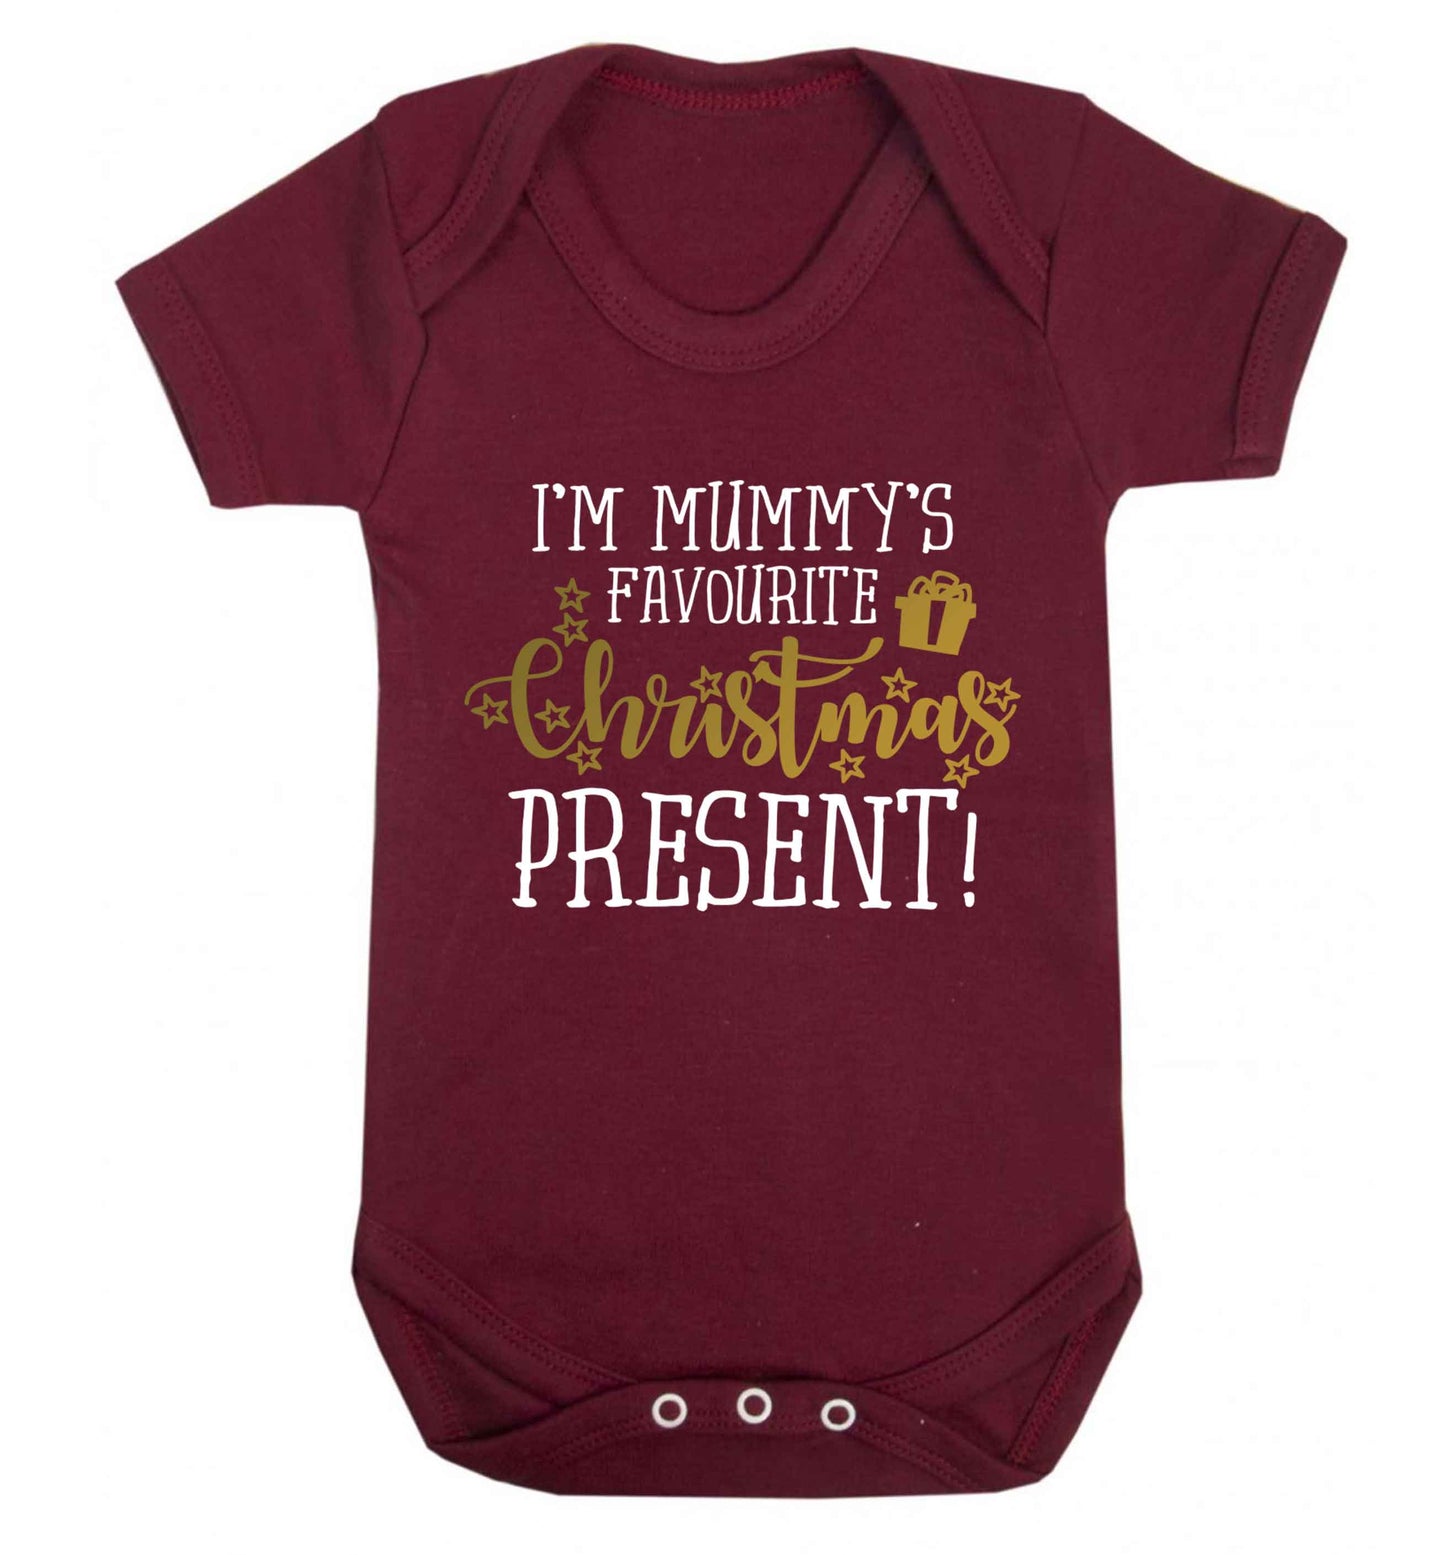 I'm Mummy's favourite Christmas present Baby Vest maroon 18-24 months